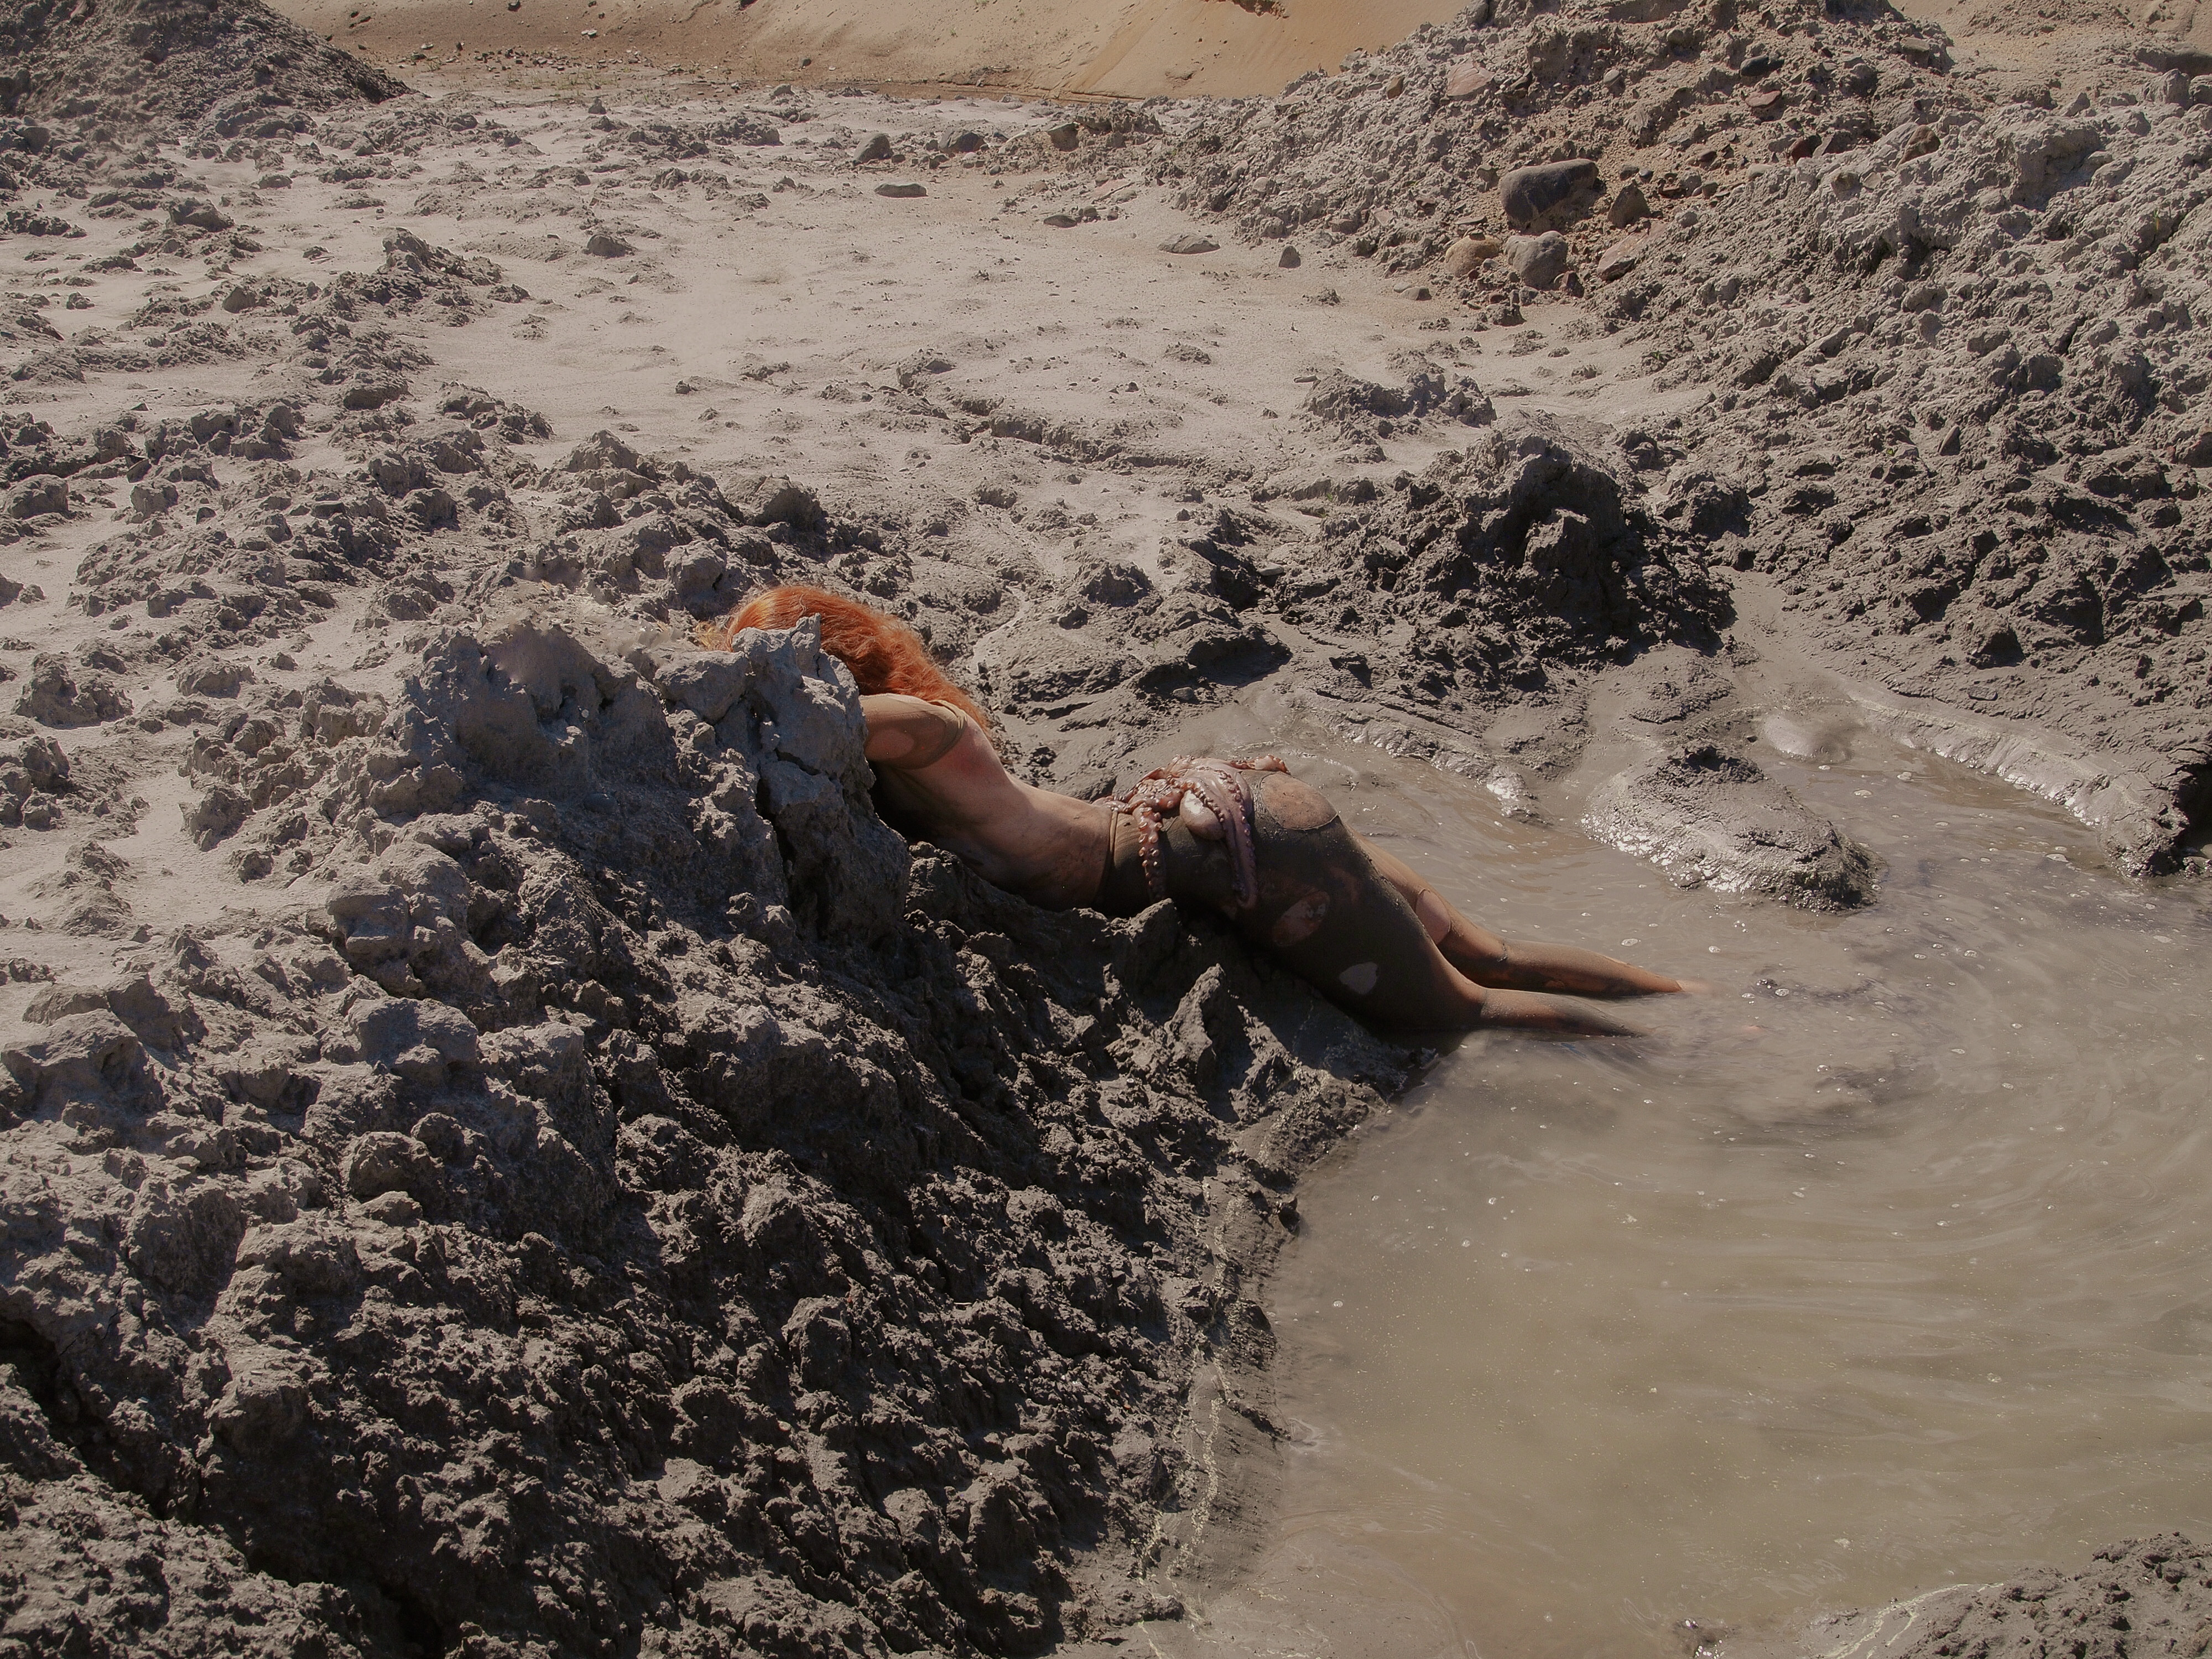 andrea zipfel share naked women in mud photos